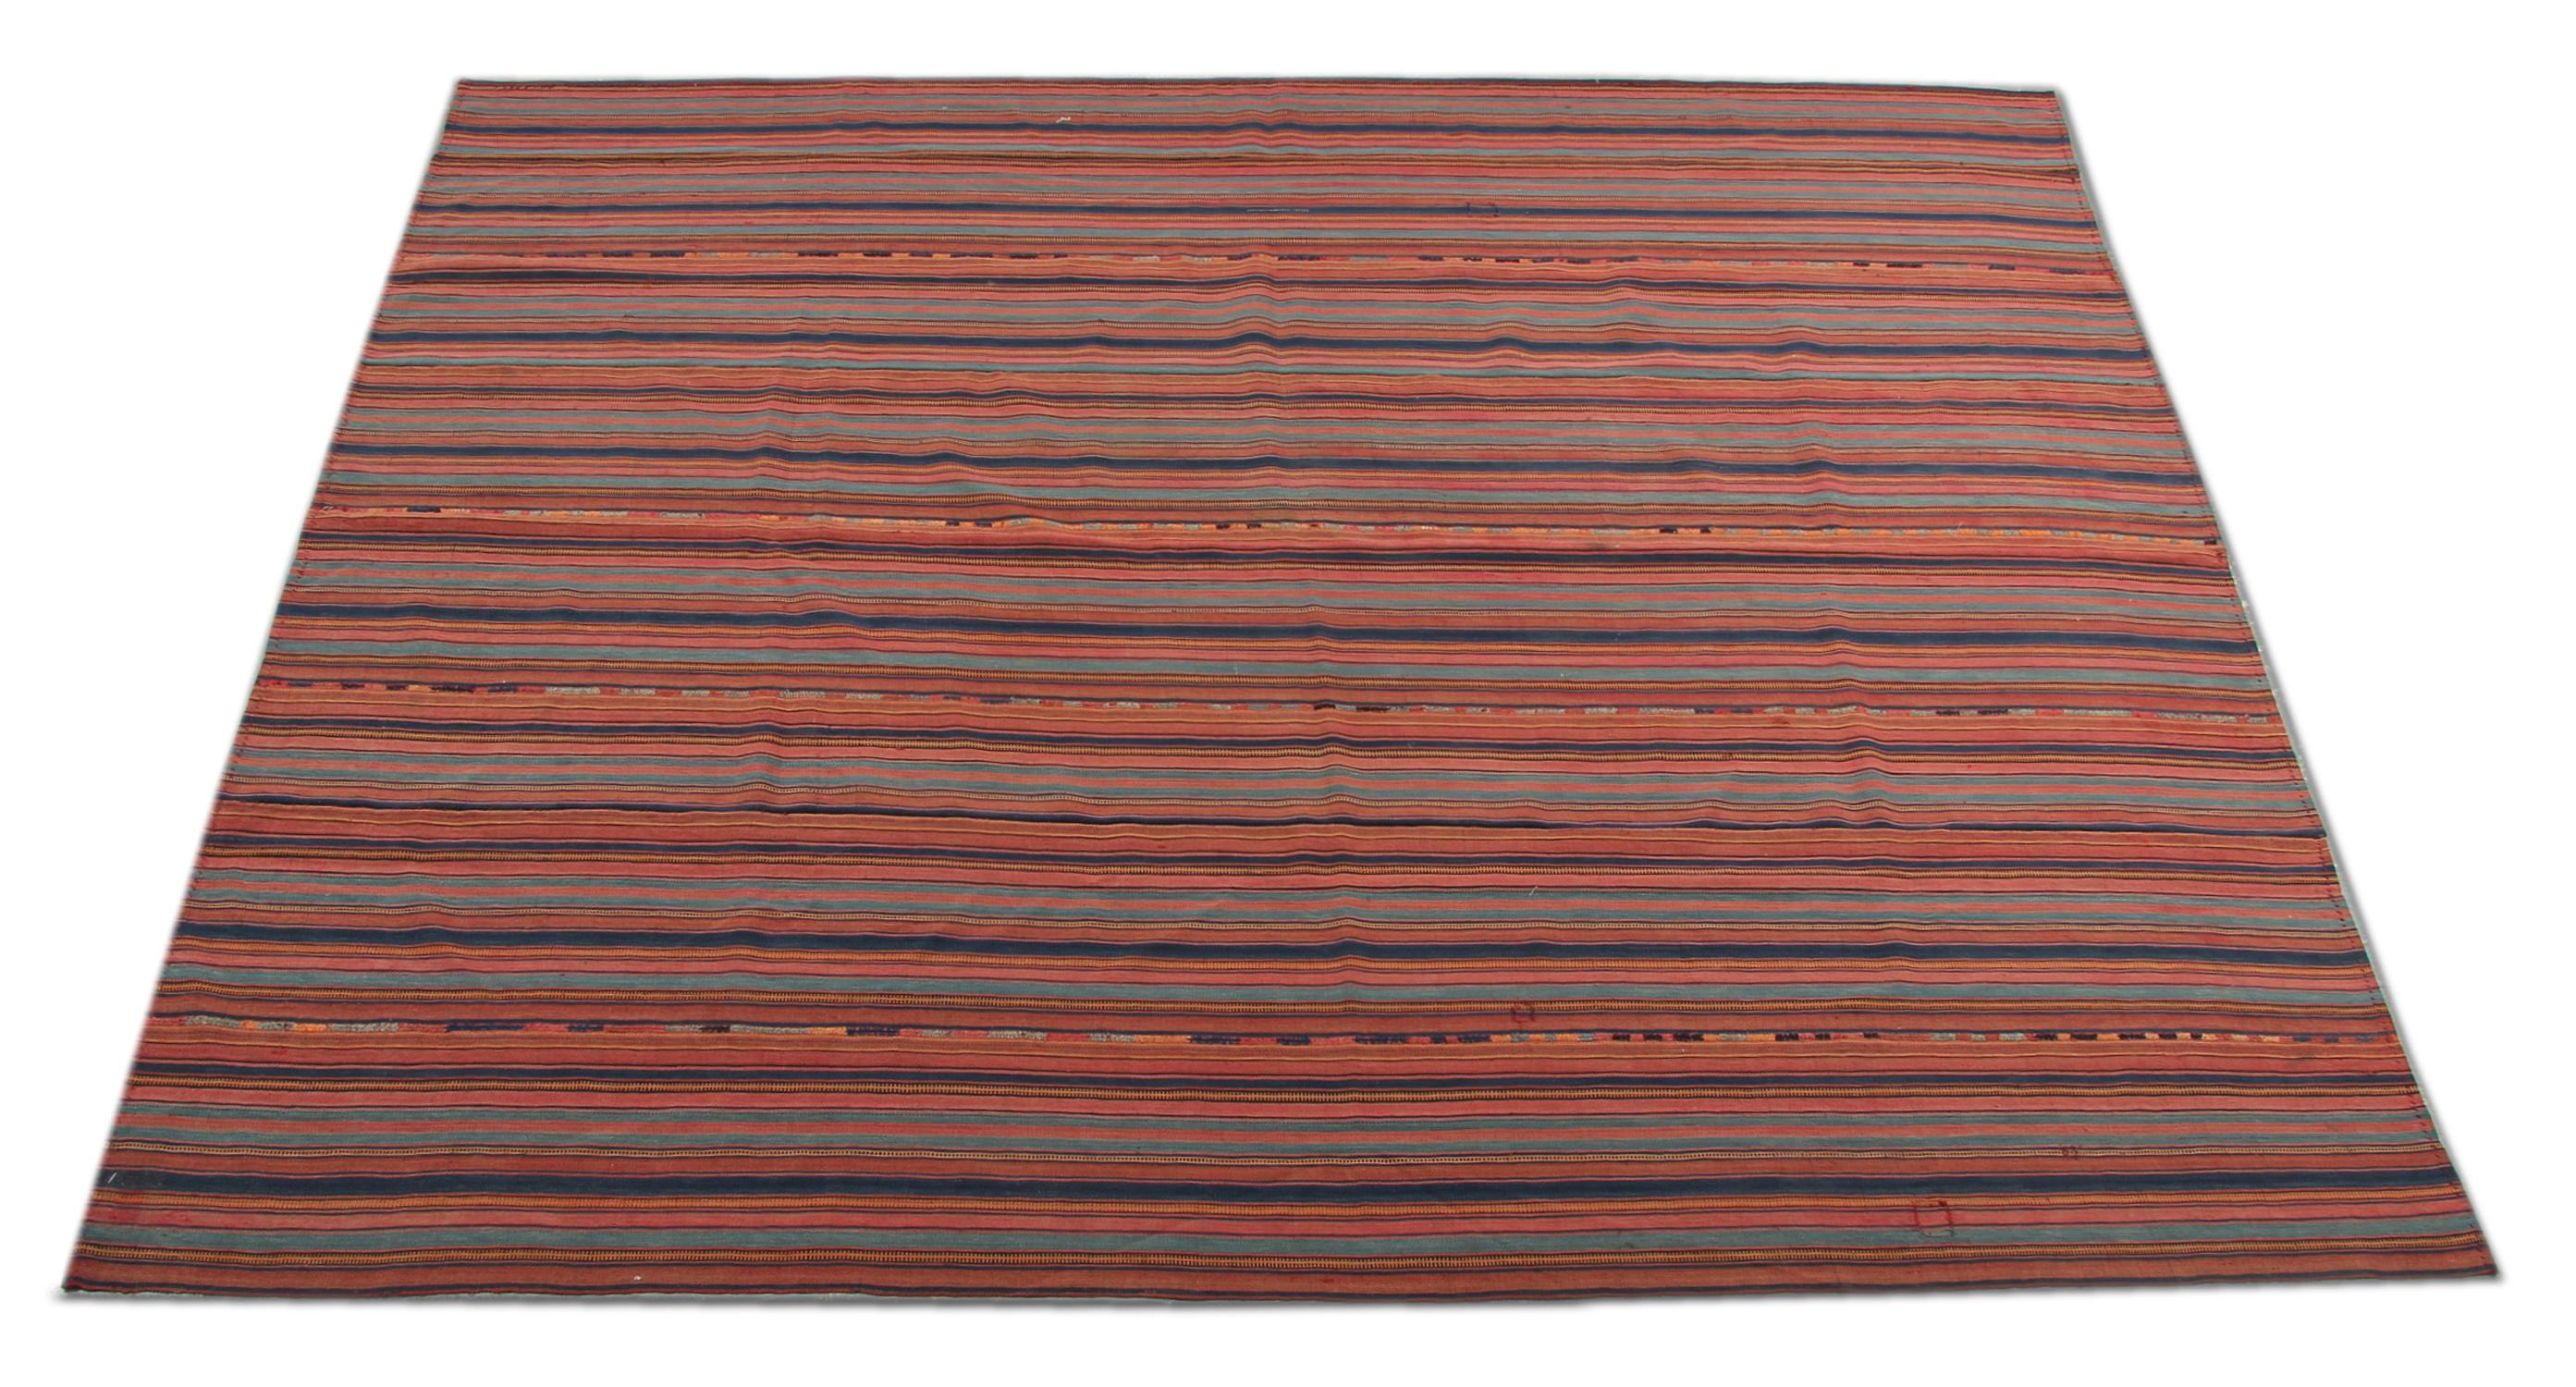 Red, rust, blue and orange make up the main colors in this fantastic handwoven Jajim. Featuring a simple, traditional stripe design, both the color and the design in this piece make it the perfect accent piece.
Constructed with fine, hand-spun wool